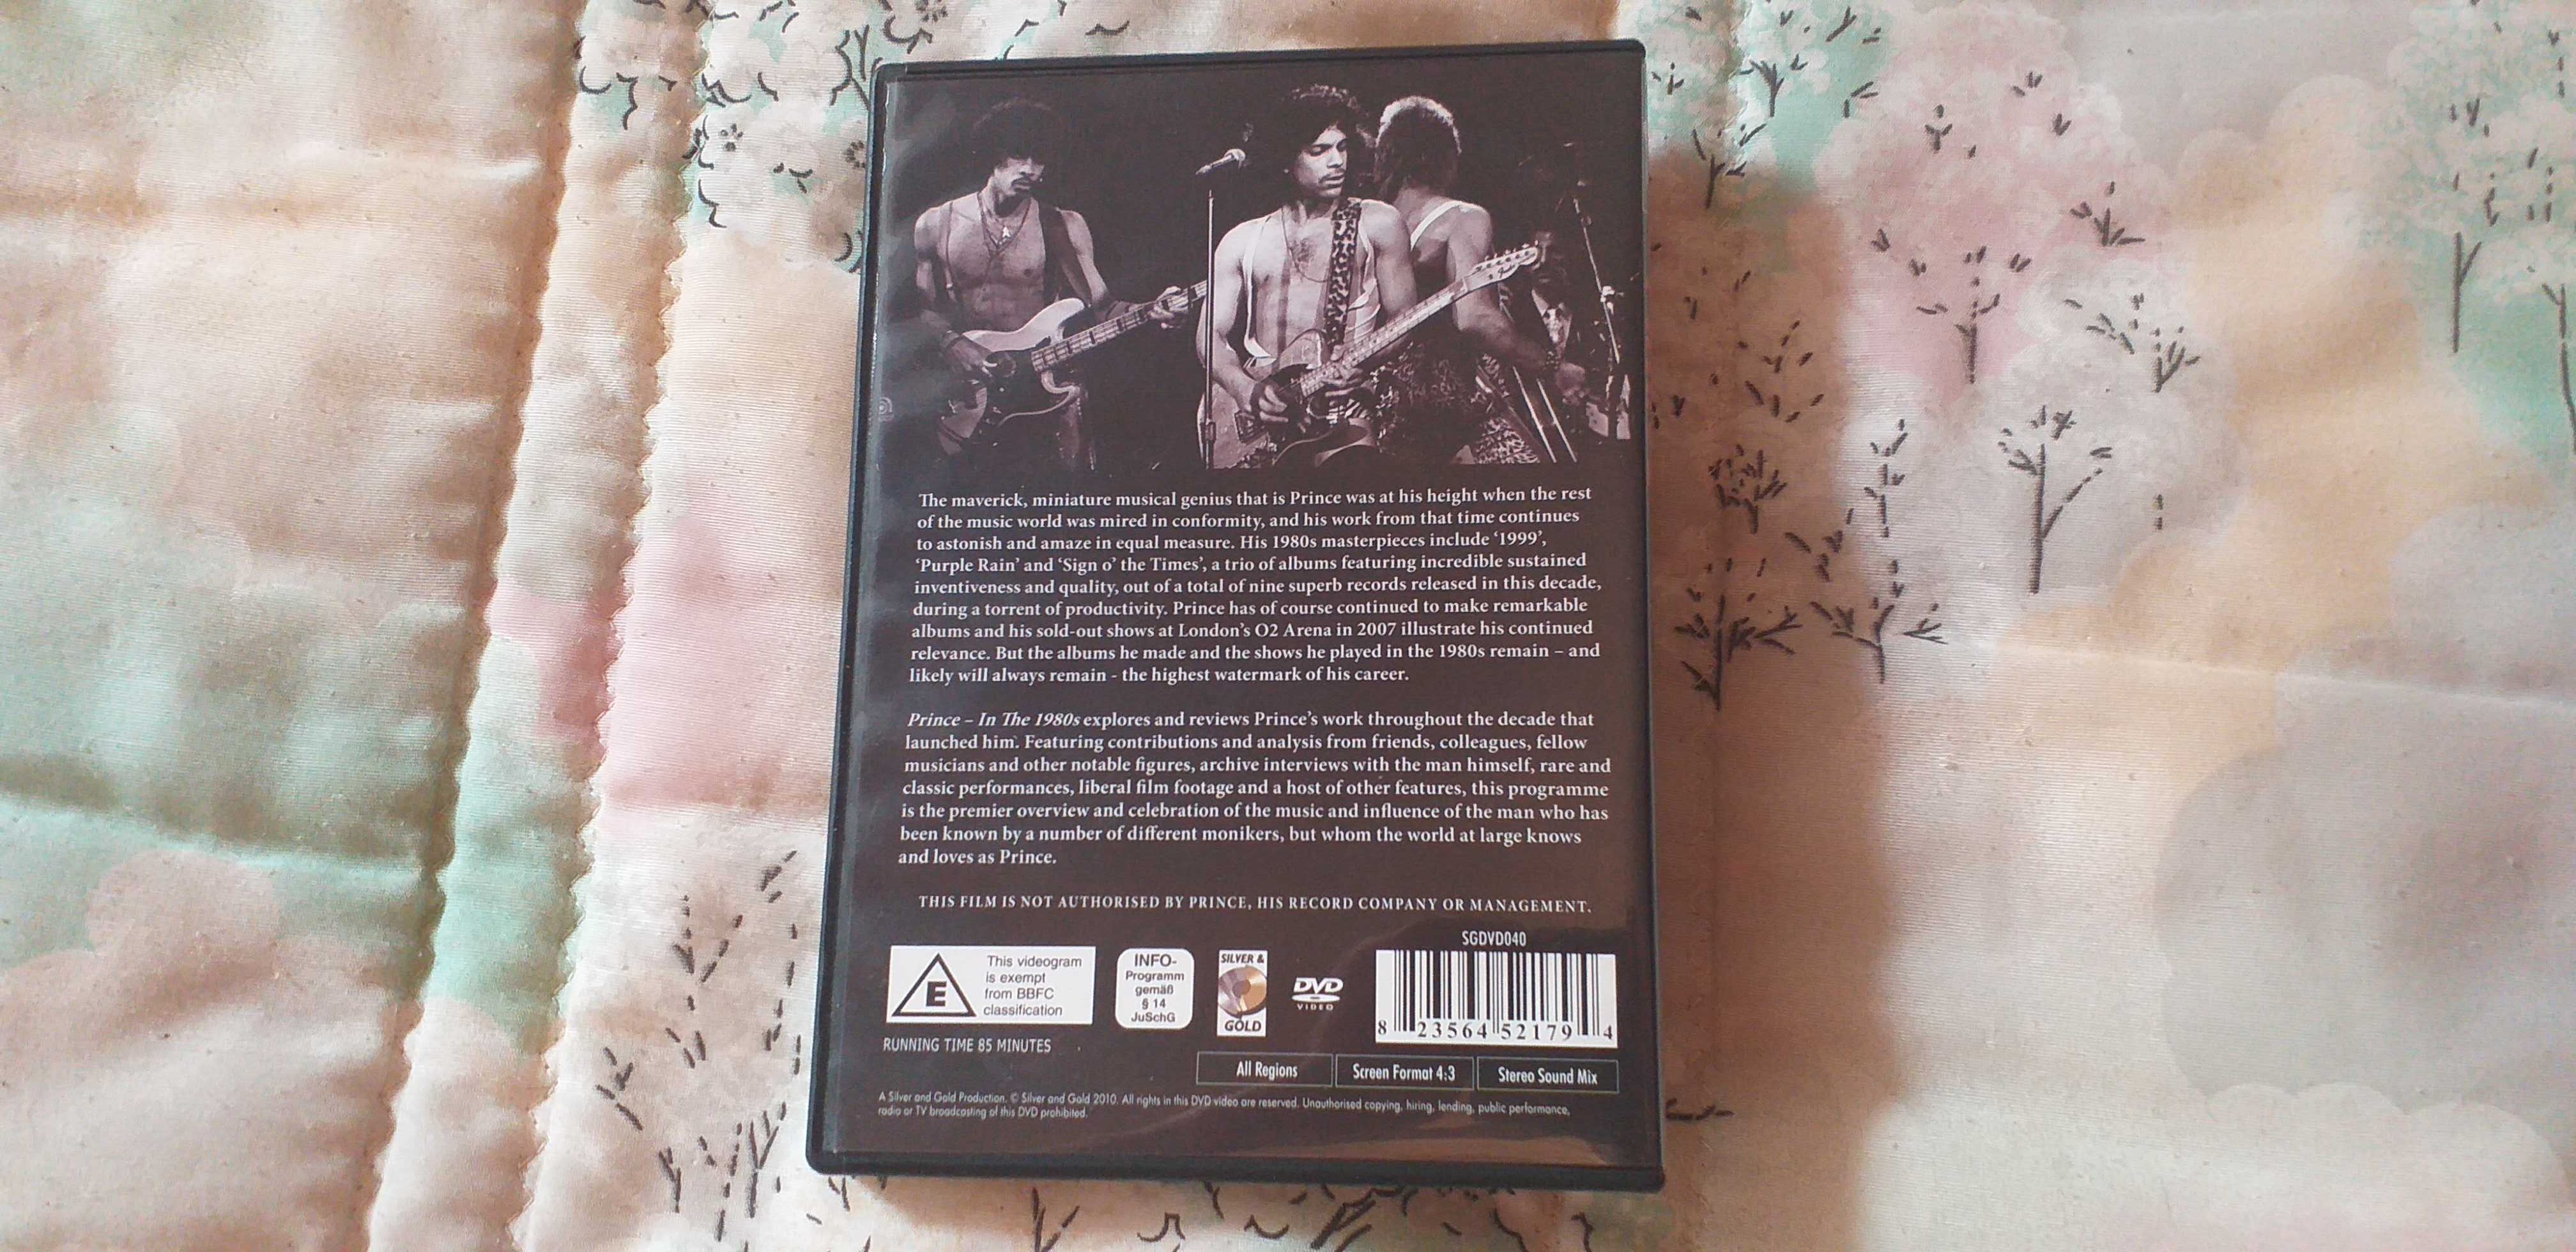 Prince - In the 80's - DVD - portes incluidos